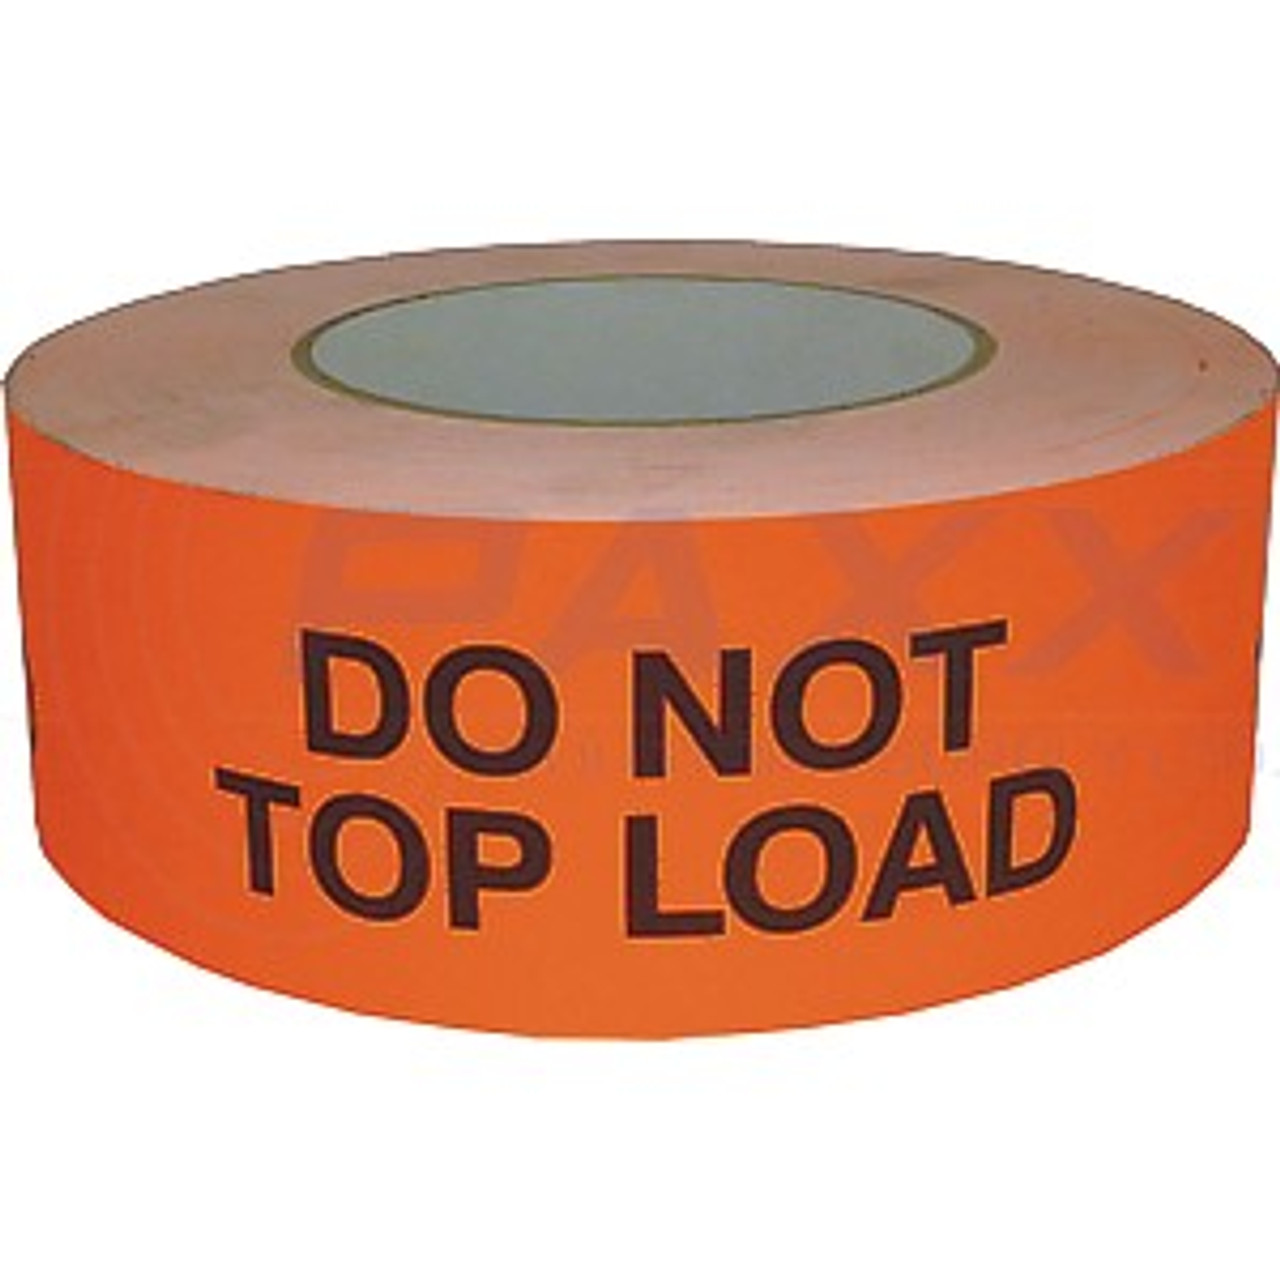 DO NOT TOP LOAD Label 2" x 5"